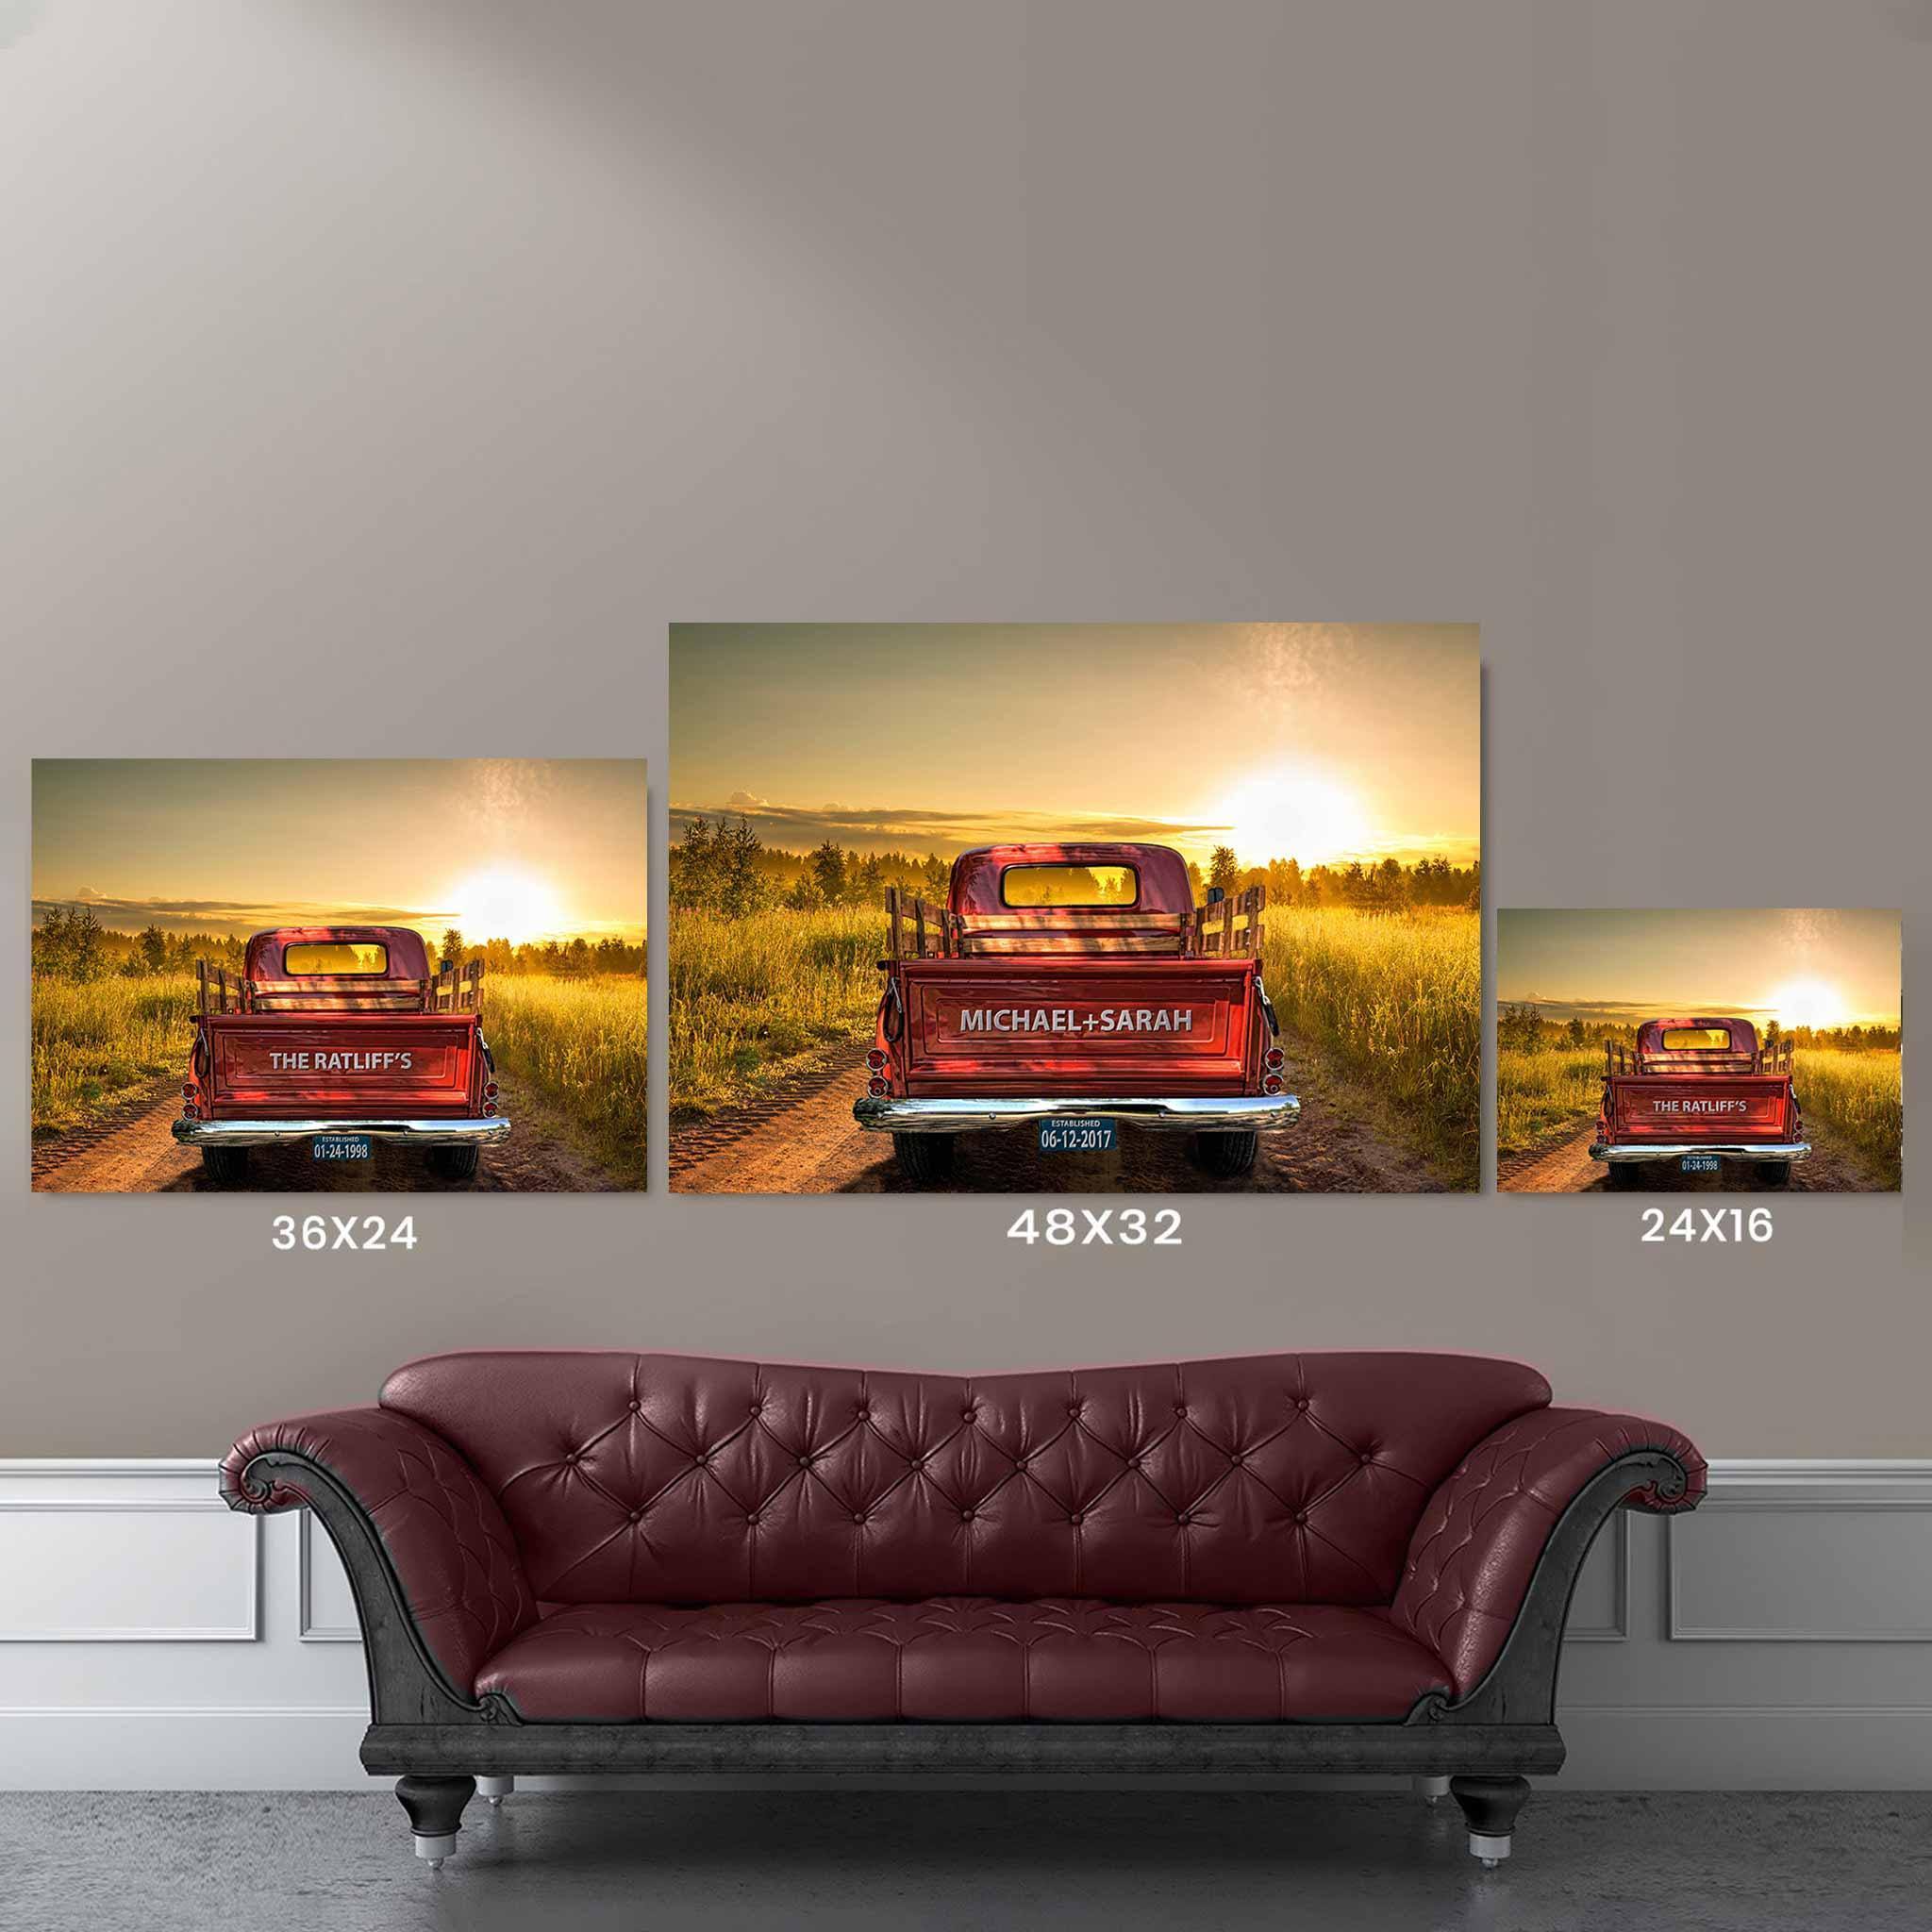 Vintage Truck On A Dirt Road And Sunset Personalized Tailgate & License Plate CanvasCustomly Gifts